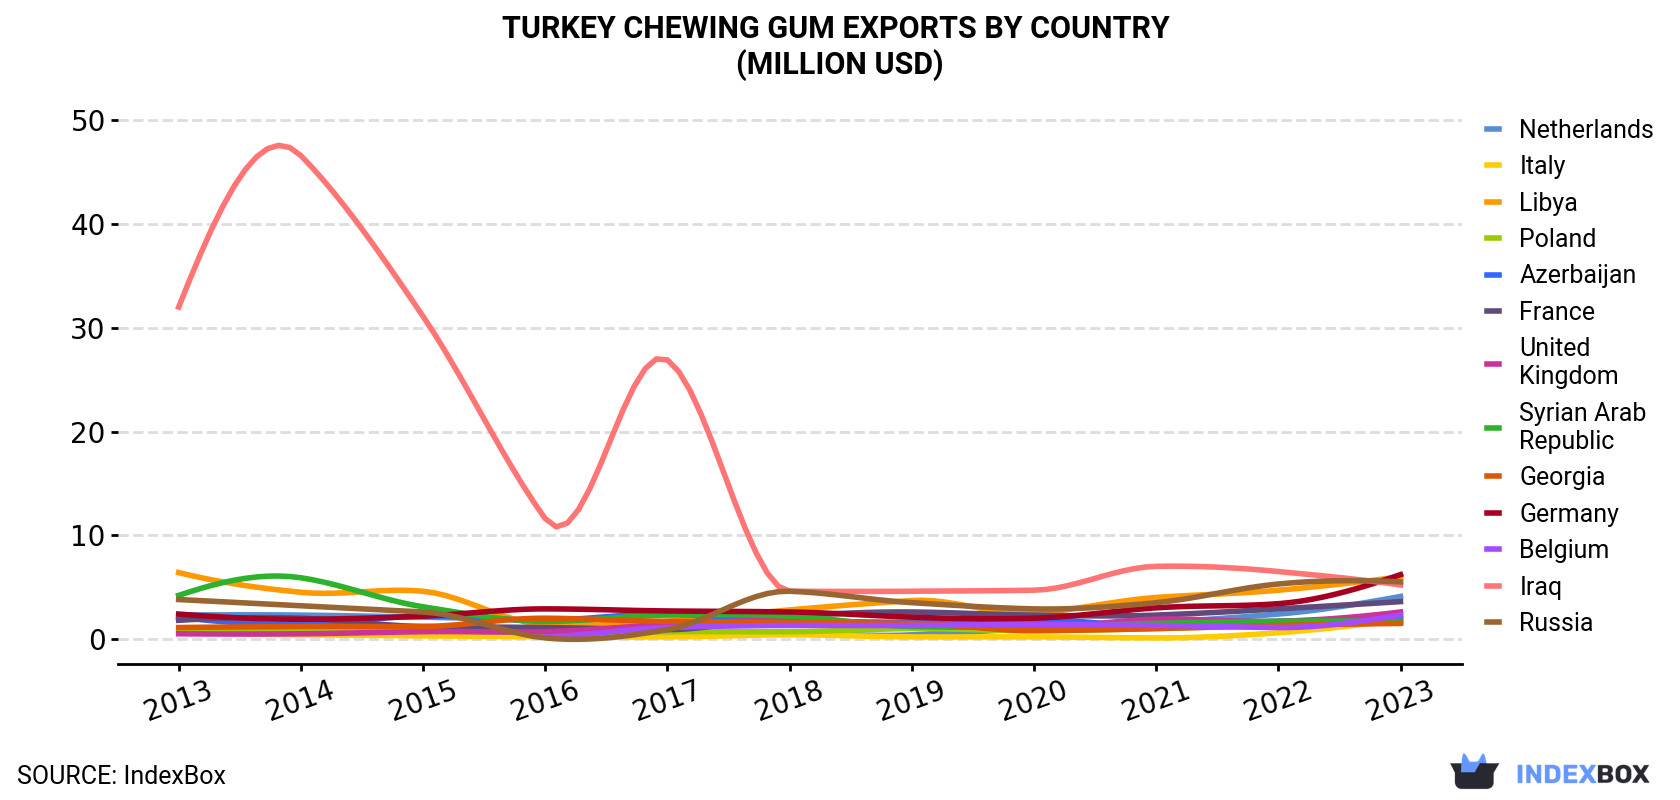 Turkey Chewing Gum Exports By Country (Million USD)